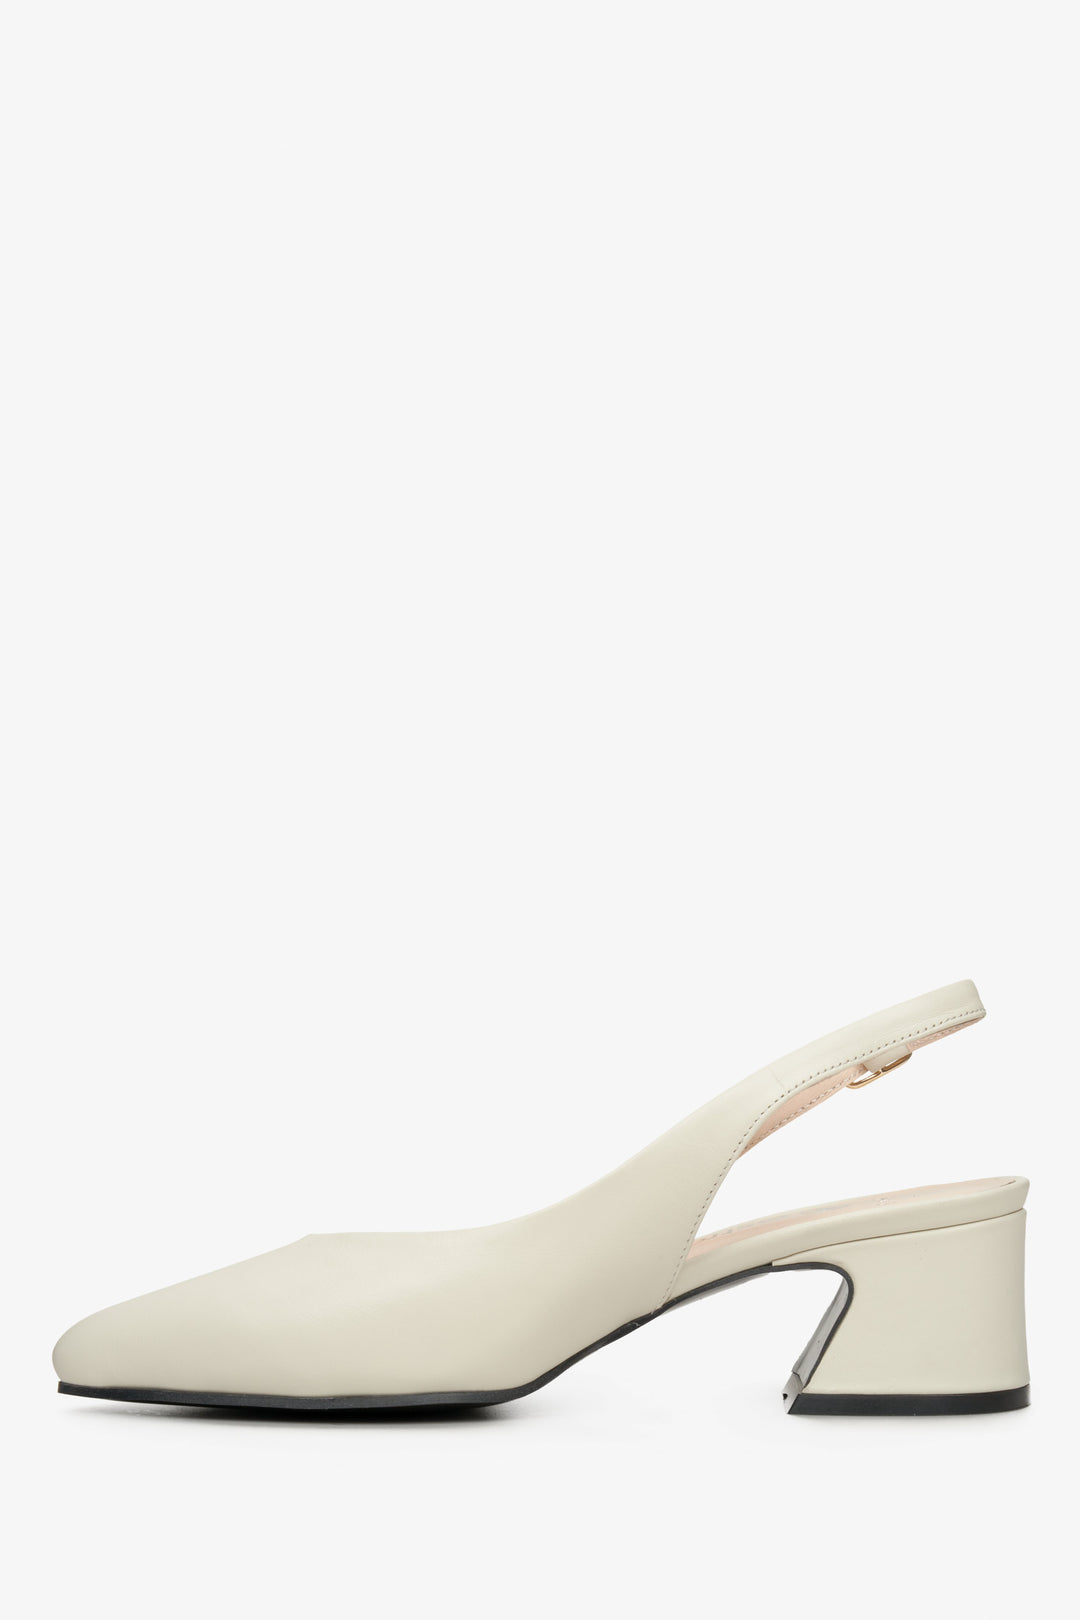 Leather women's pumps with a stiletto heel and open back by Estro - shoe profile.